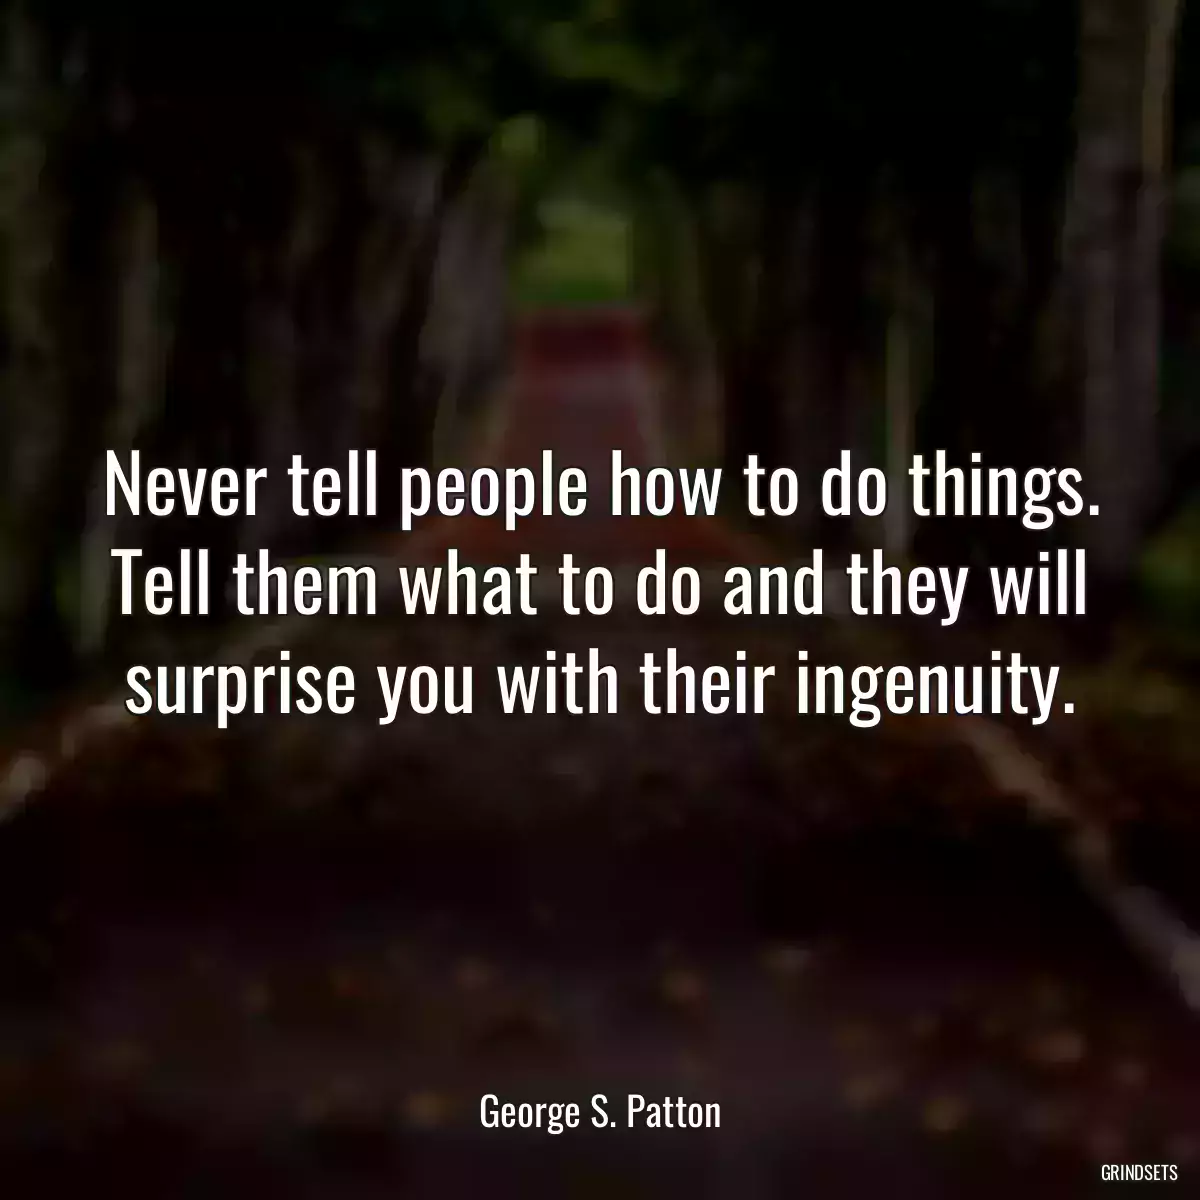 Never tell people how to do things. Tell them what to do and they will surprise you with their ingenuity.